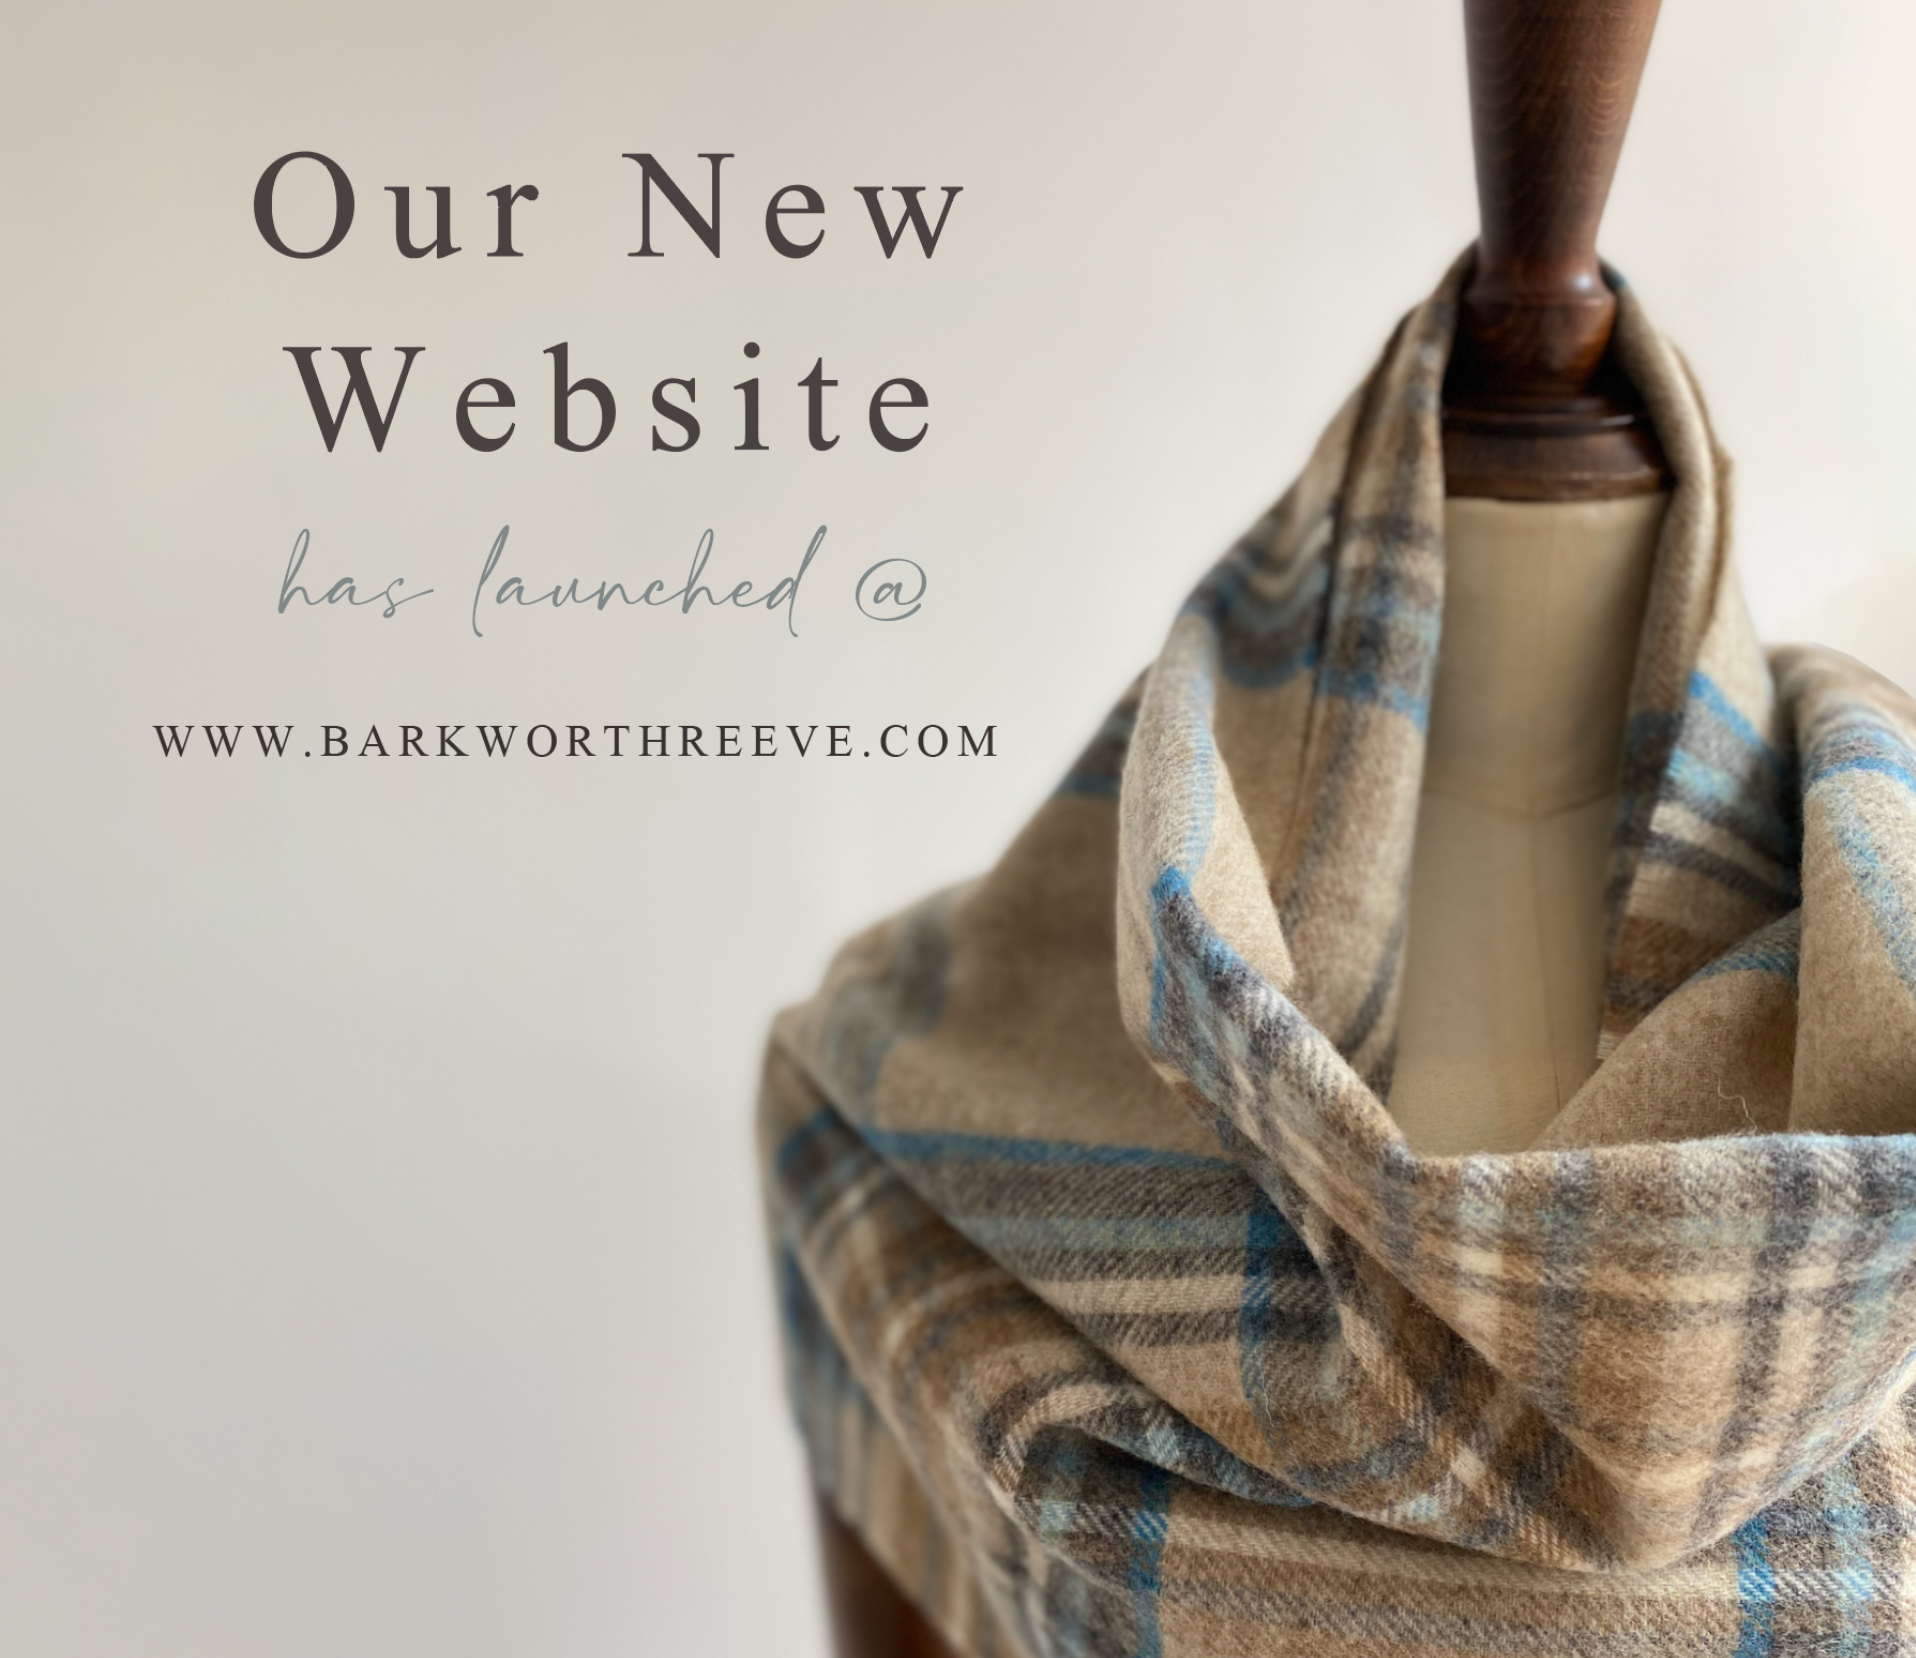 Redefining Country Classics: Introducing the All-New Barkworth Reeve Website